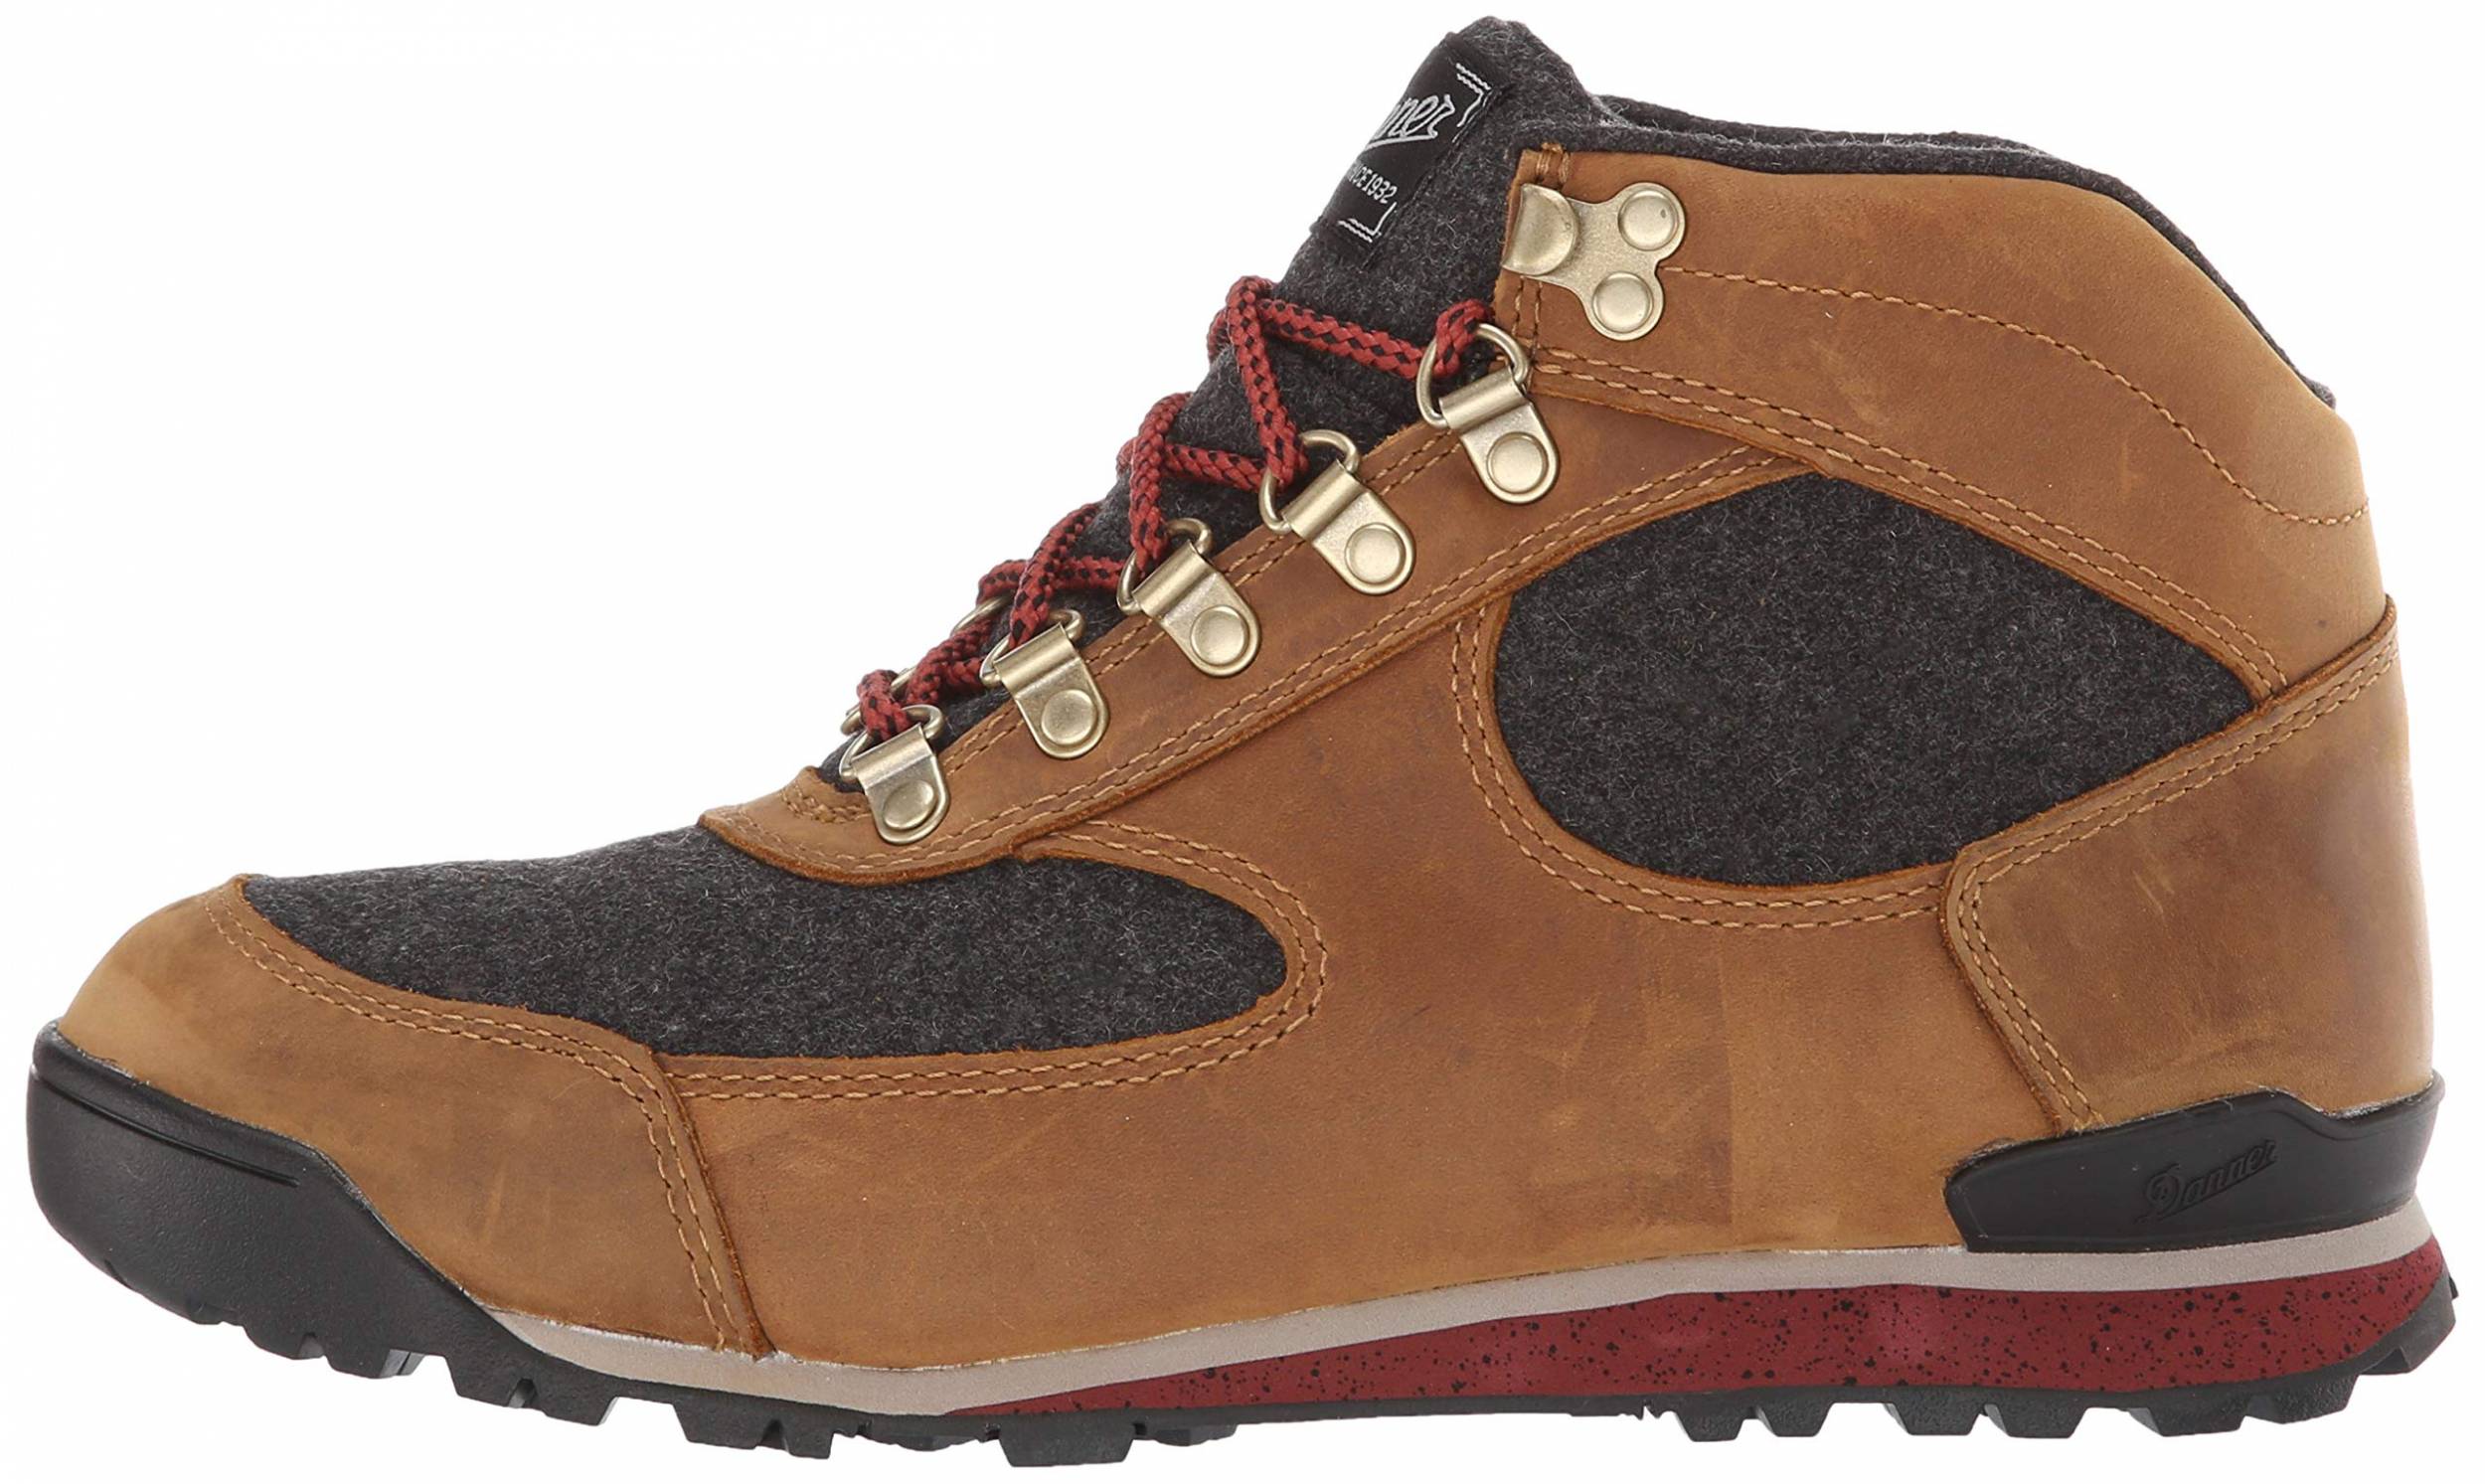 Only $179 + Review of Danner Jag Wool 